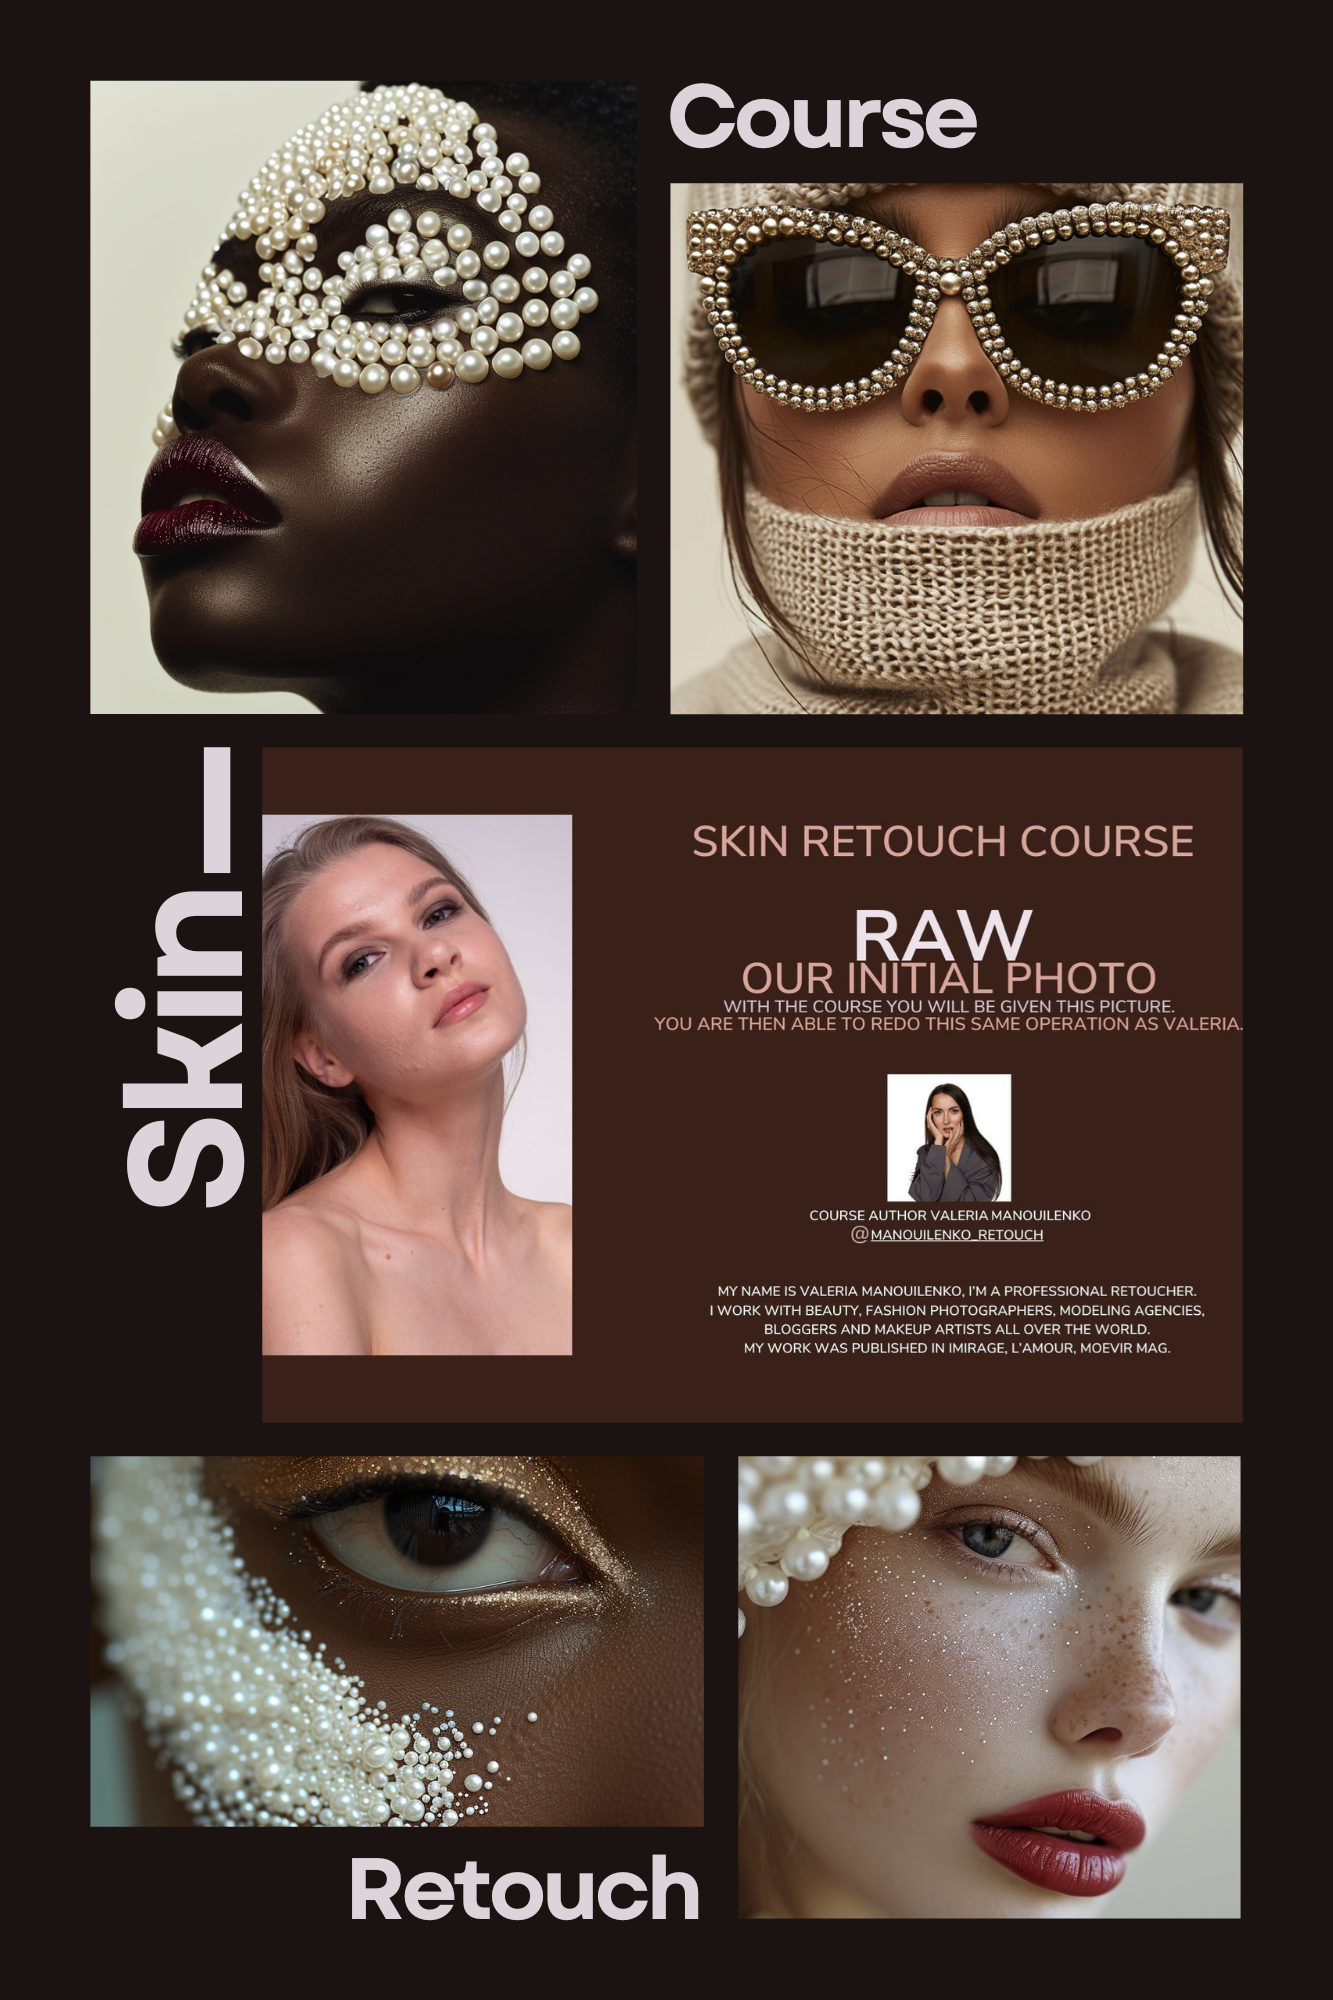 01.B Skin Retouch Course